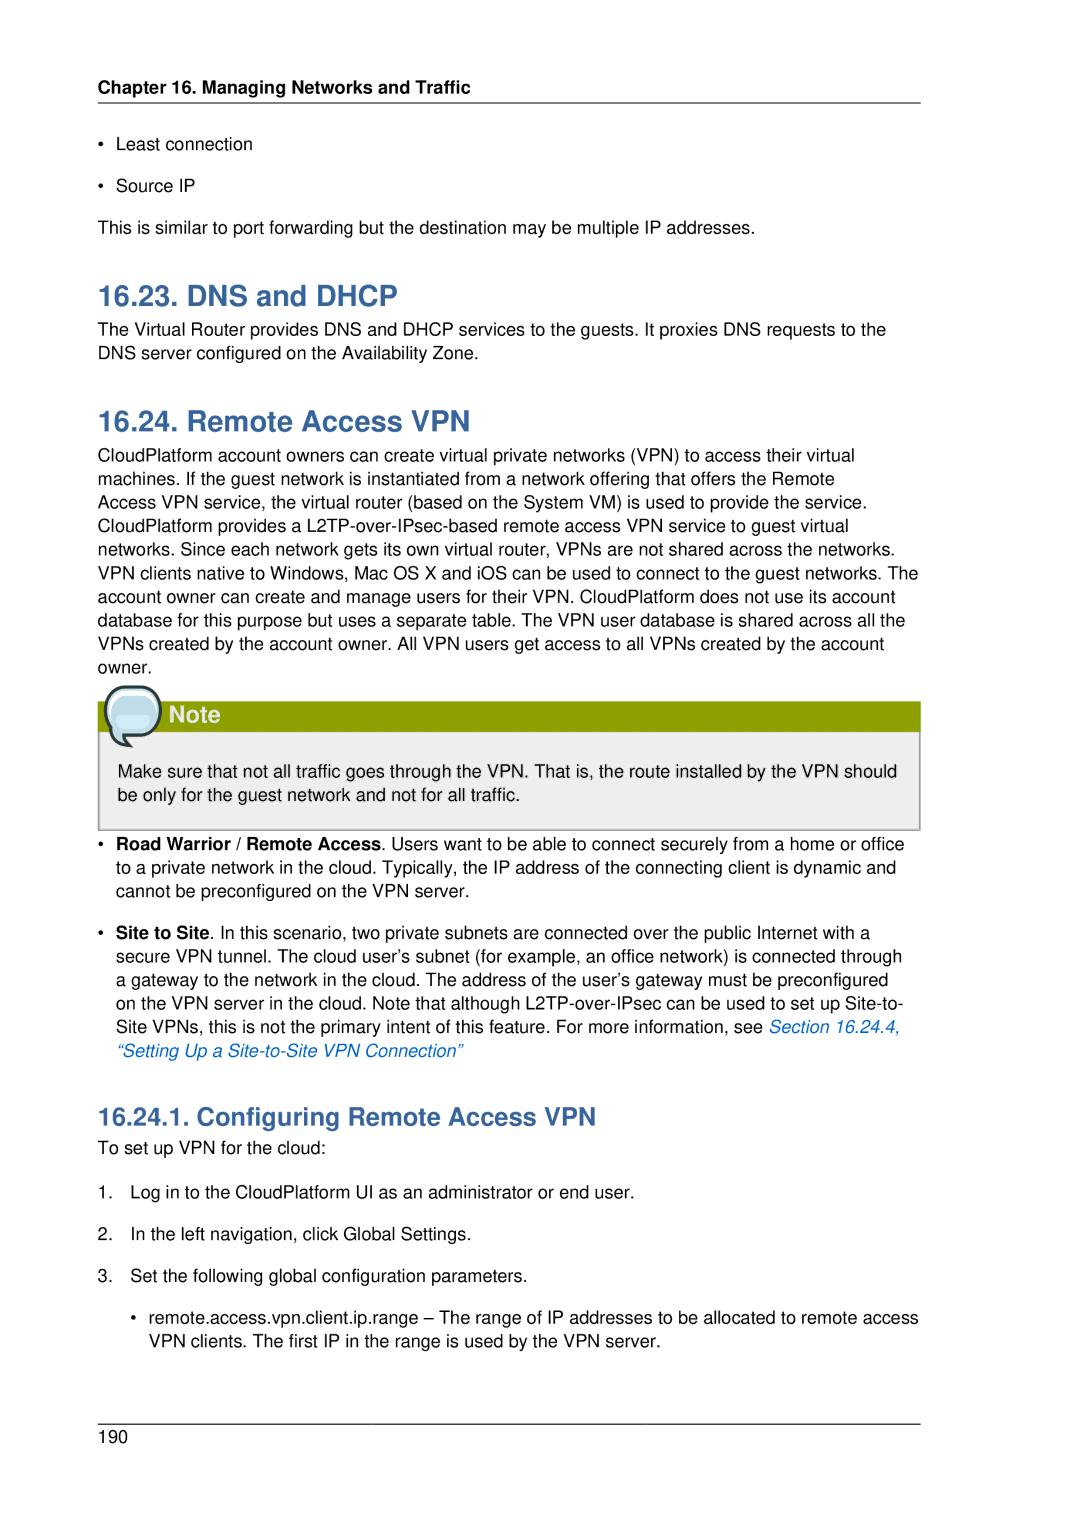 Citrix Systems 4.2 manual DNS and Dhcp, Configuring Remote Access VPN 